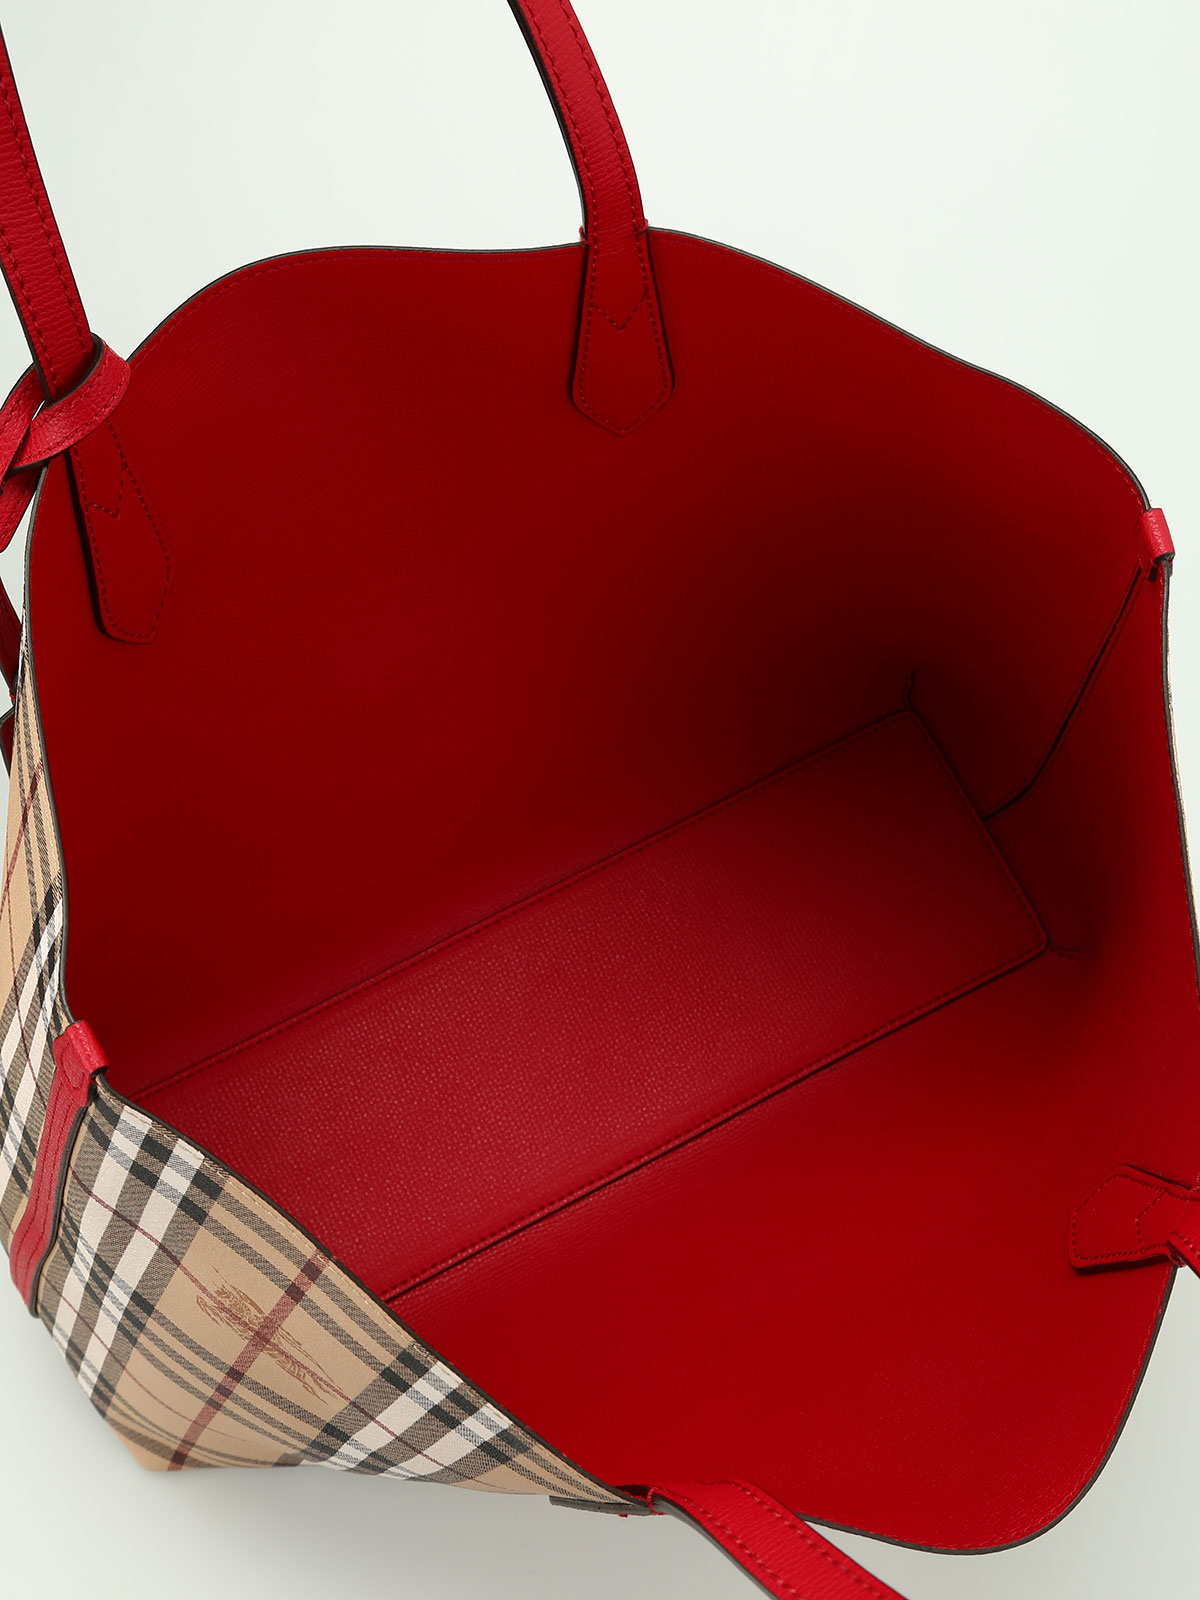 burberry tote bag red